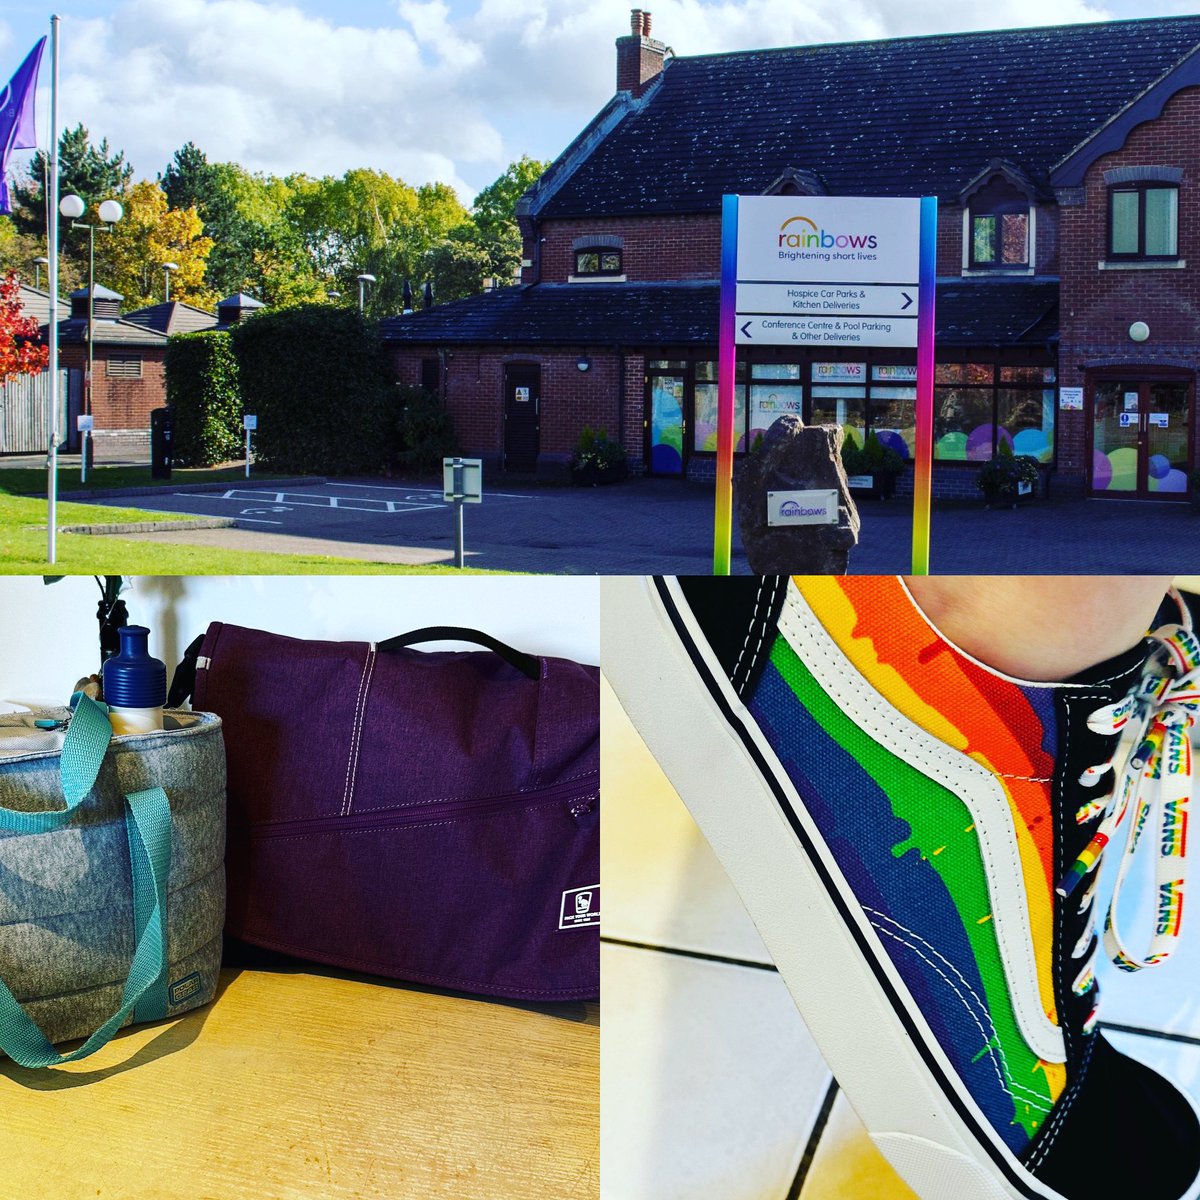 New Shoes, New Bag, can only mean one thing…New Job! Very excited to be starting my new role as Advance Clinical Practitioner @RainbowsHospice #newchallenge